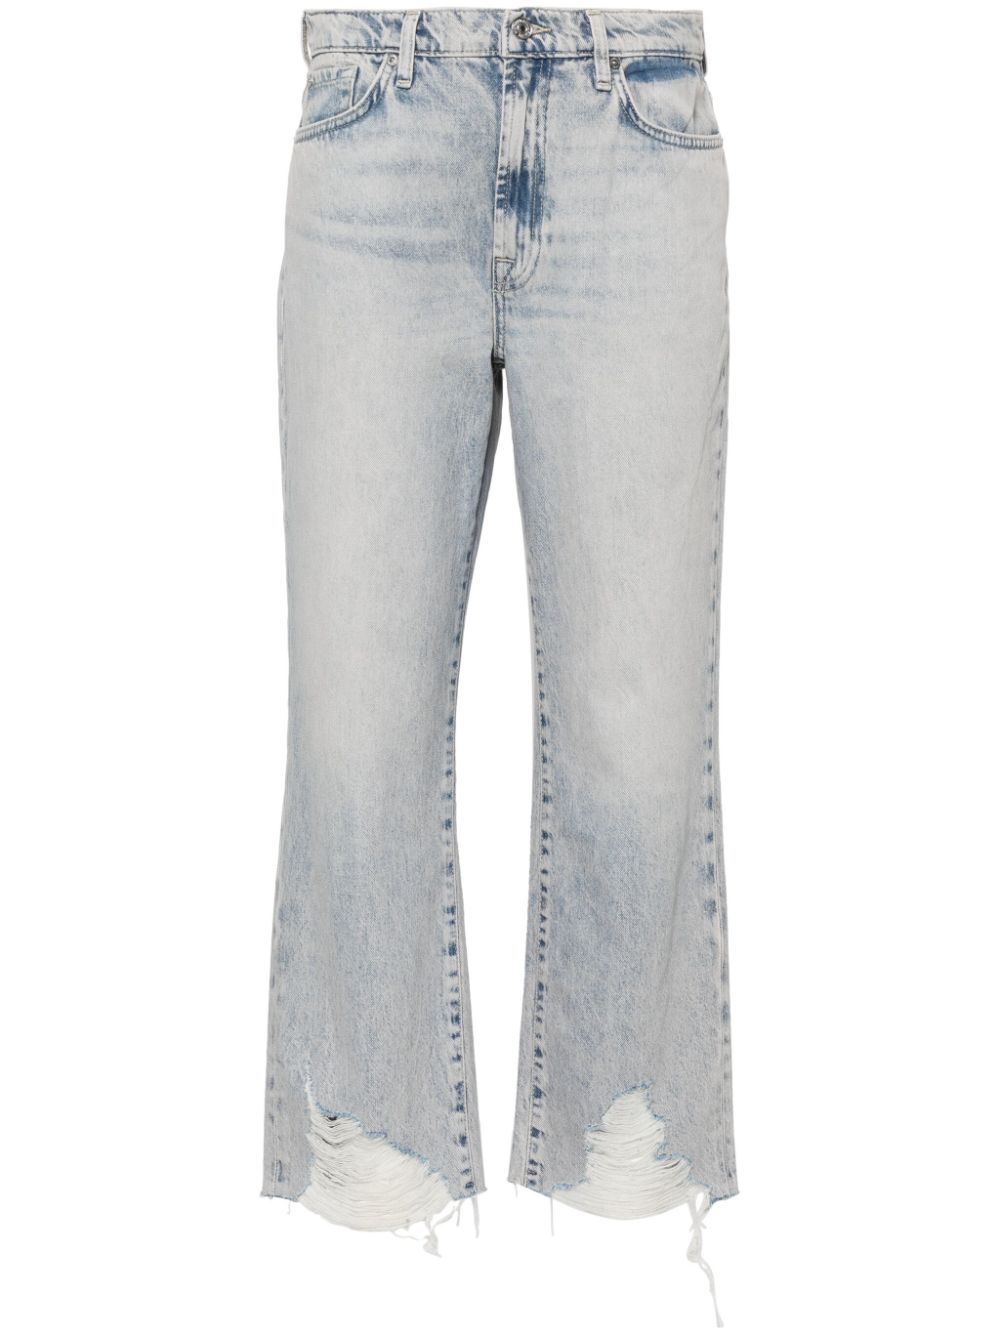 7 For All Mankind 7 FOR ALL MANKIND- Logan Cropped Denim Jeans